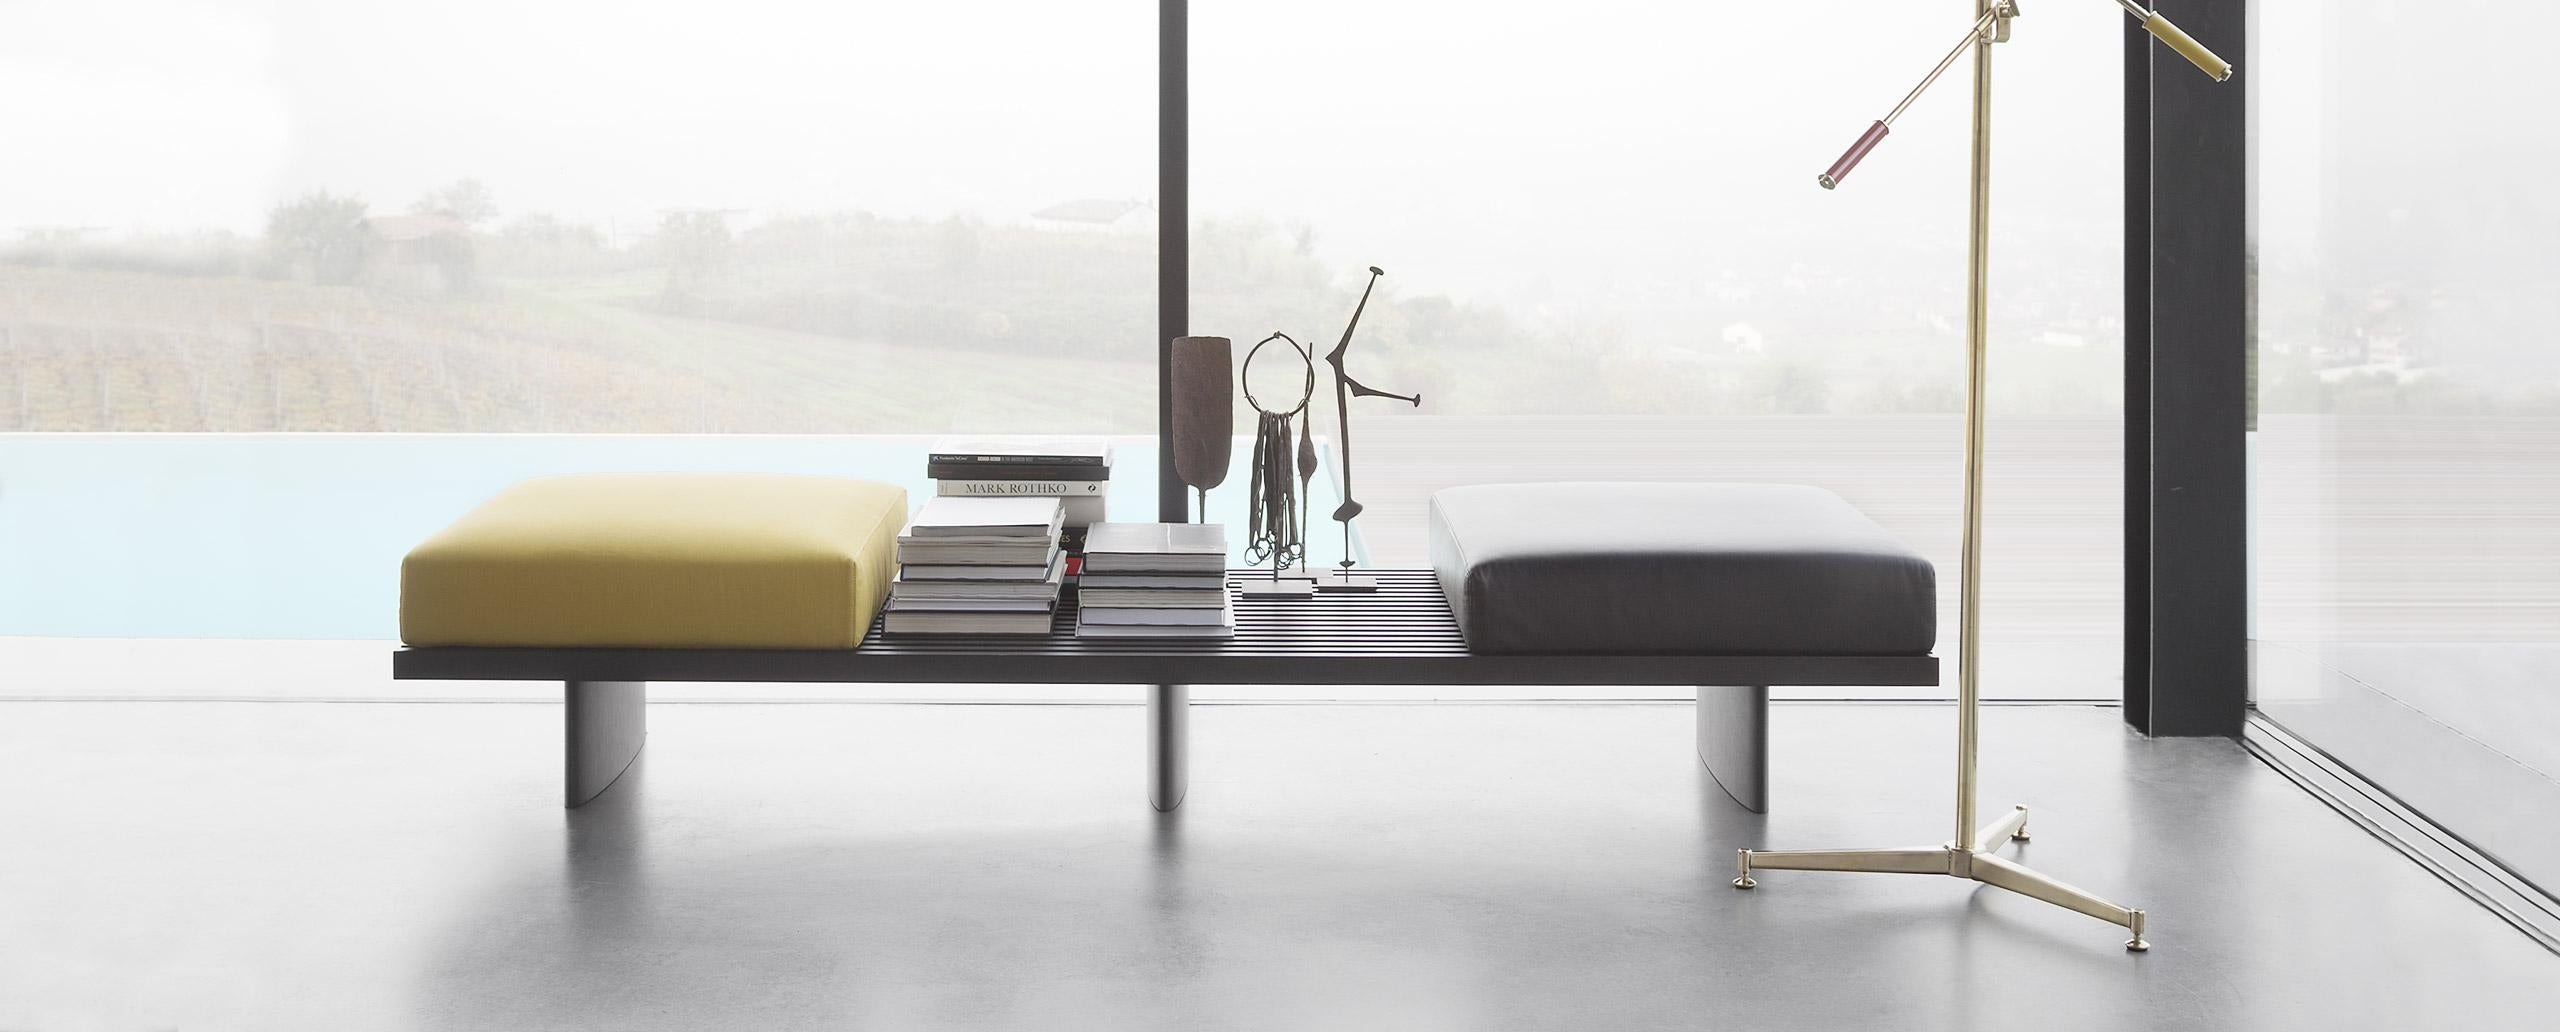 Charlotte Perriand Refolo Modular Sofa, Wood and Black Leather by Cassina 2